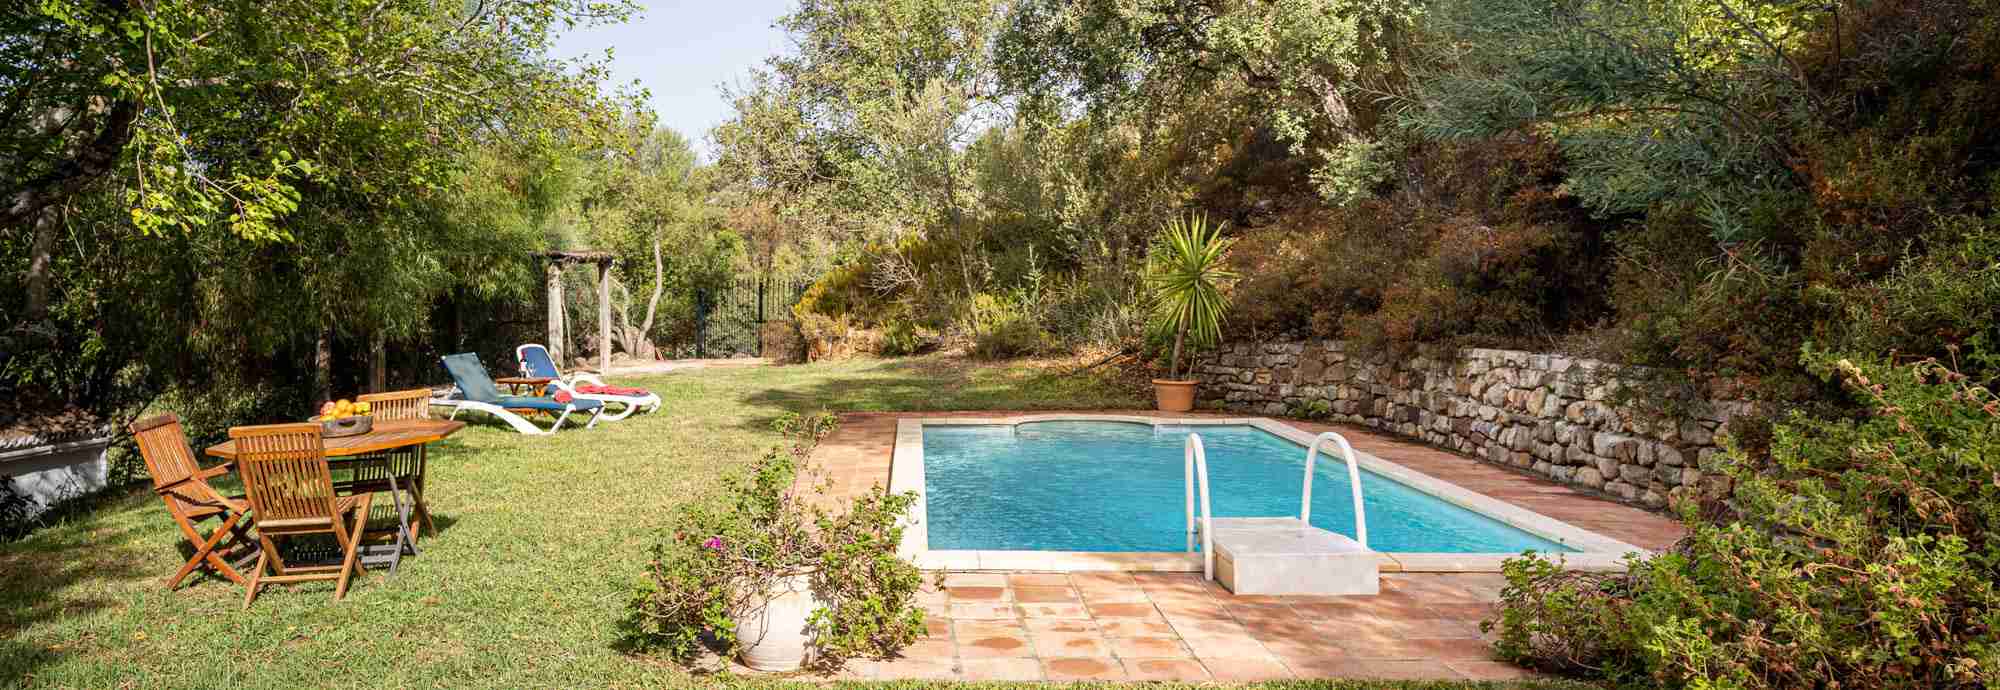 A sweetly wrapped holiday retreat for two near Gaucin